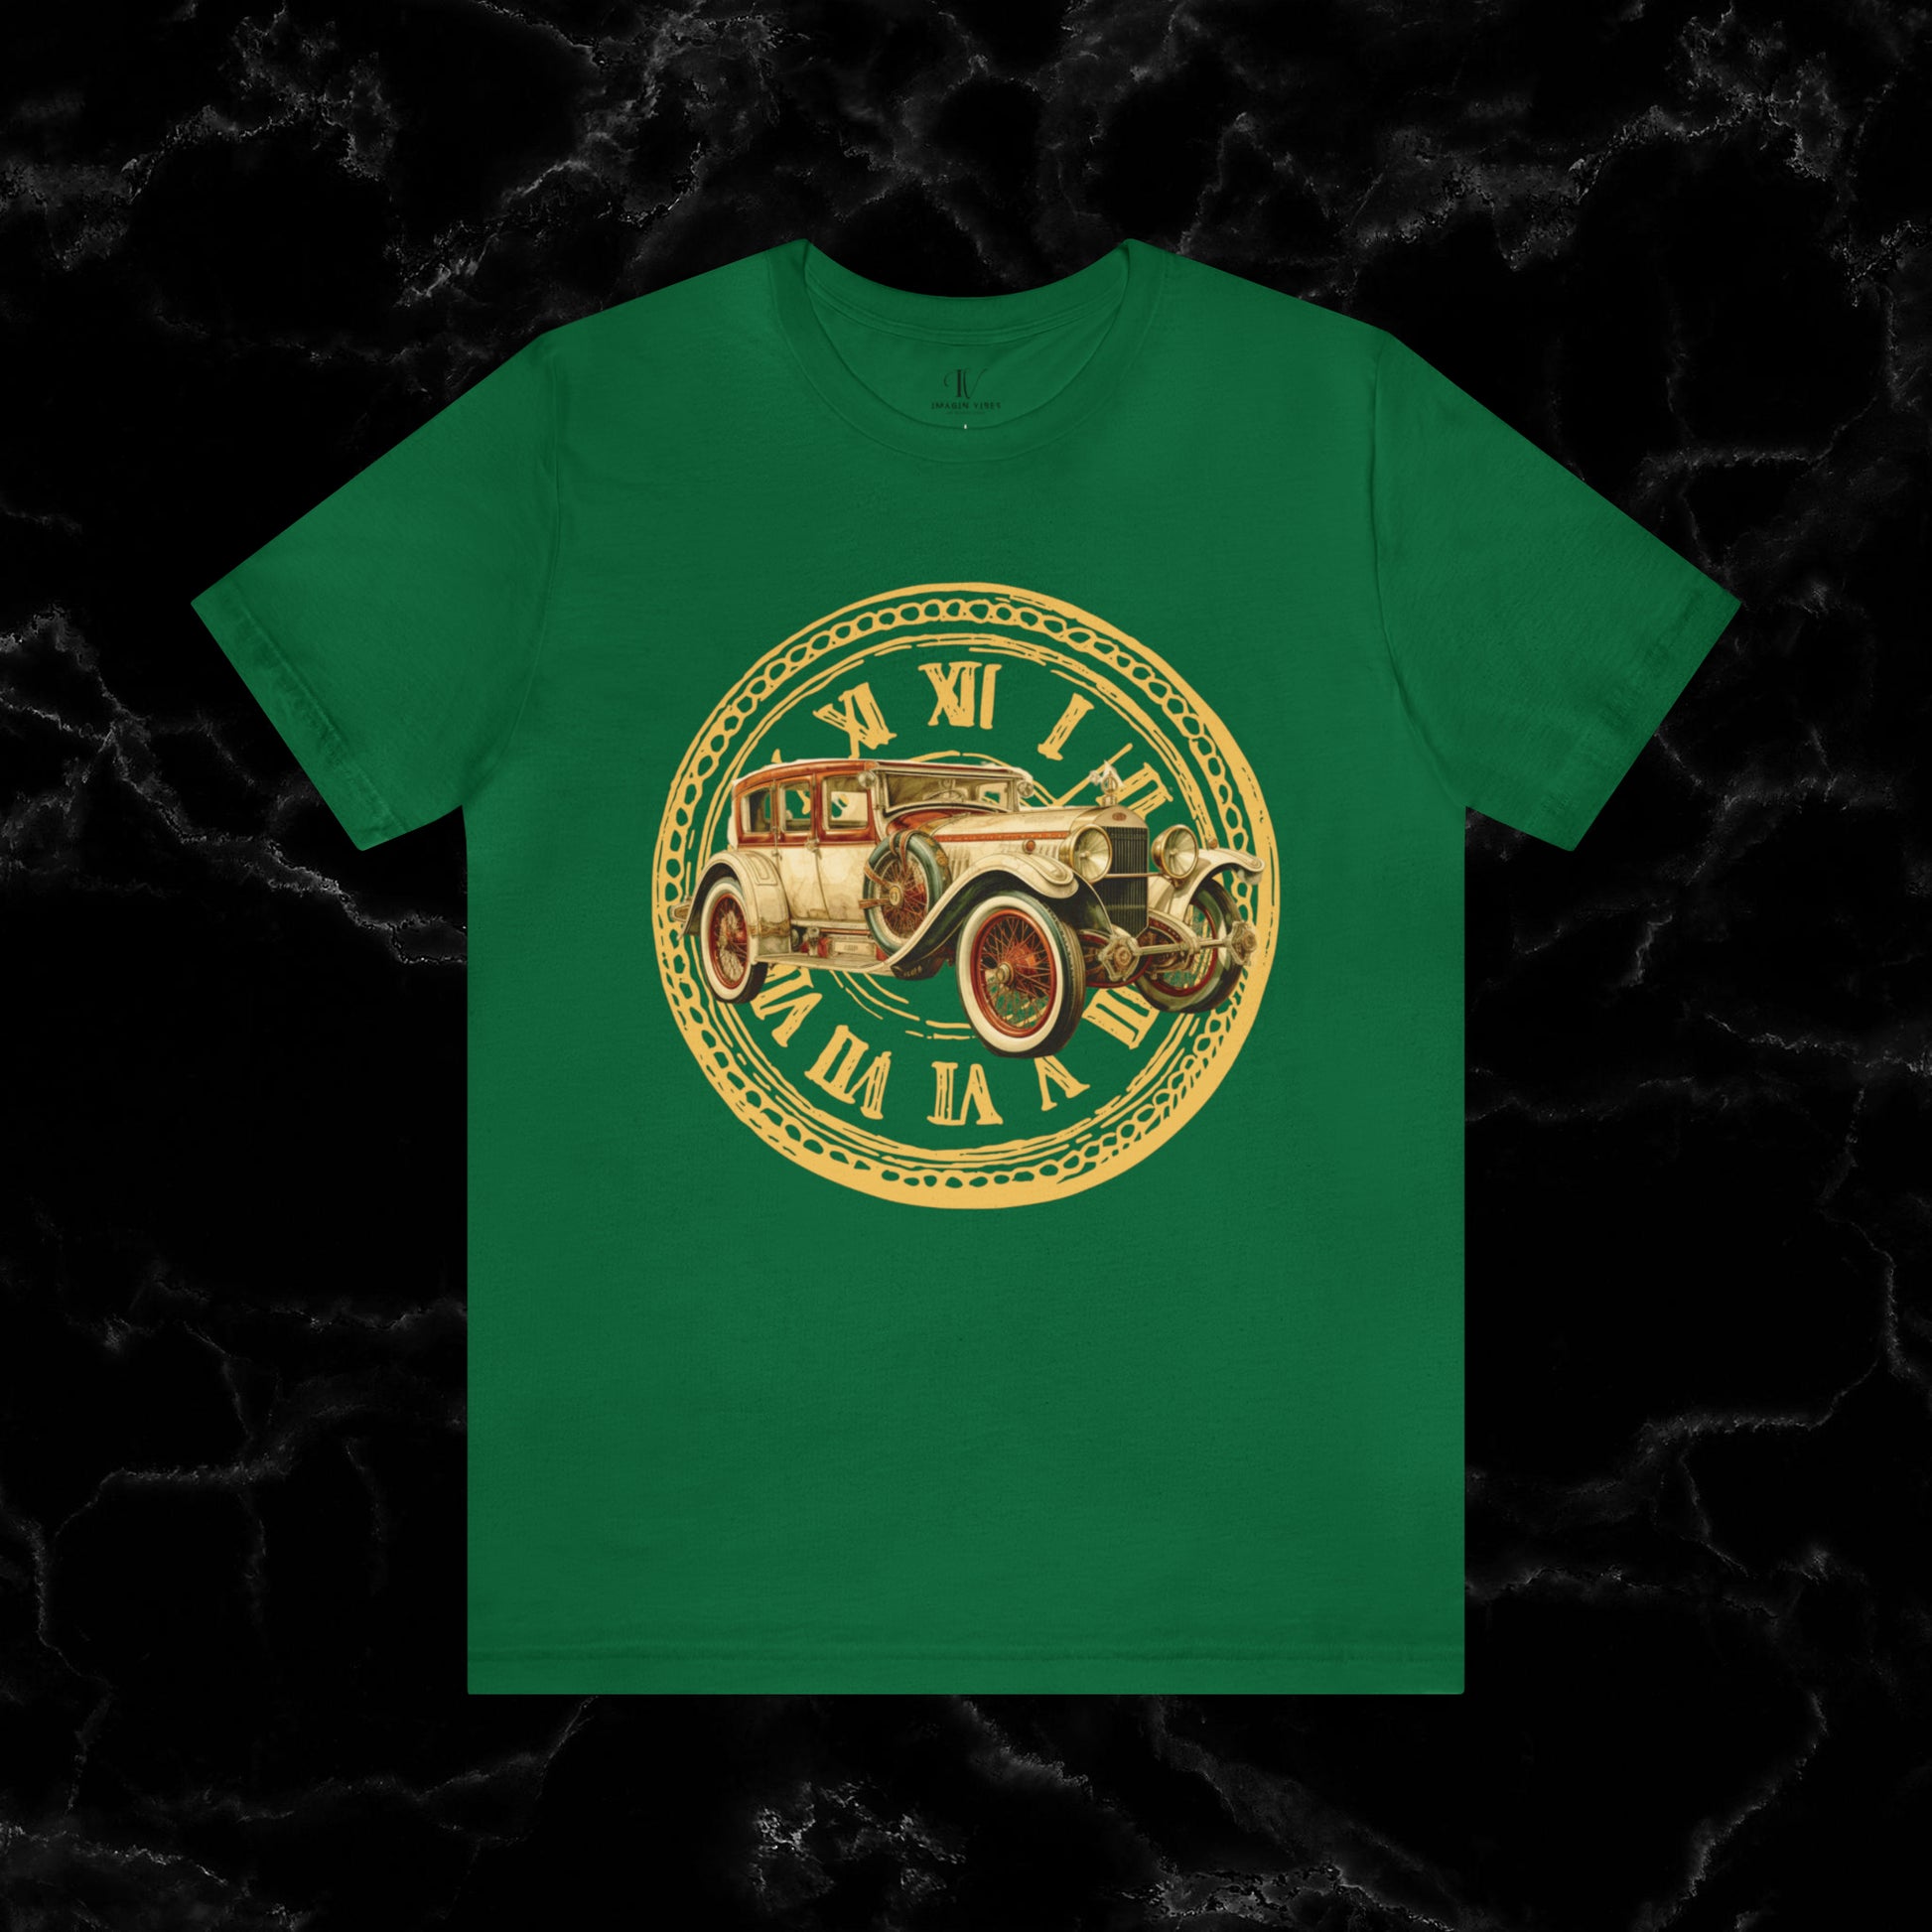 Vintage Car Enthusiast T-Shirt with Classic Wheels and Timeless Appeal T-Shirt Kelly S 